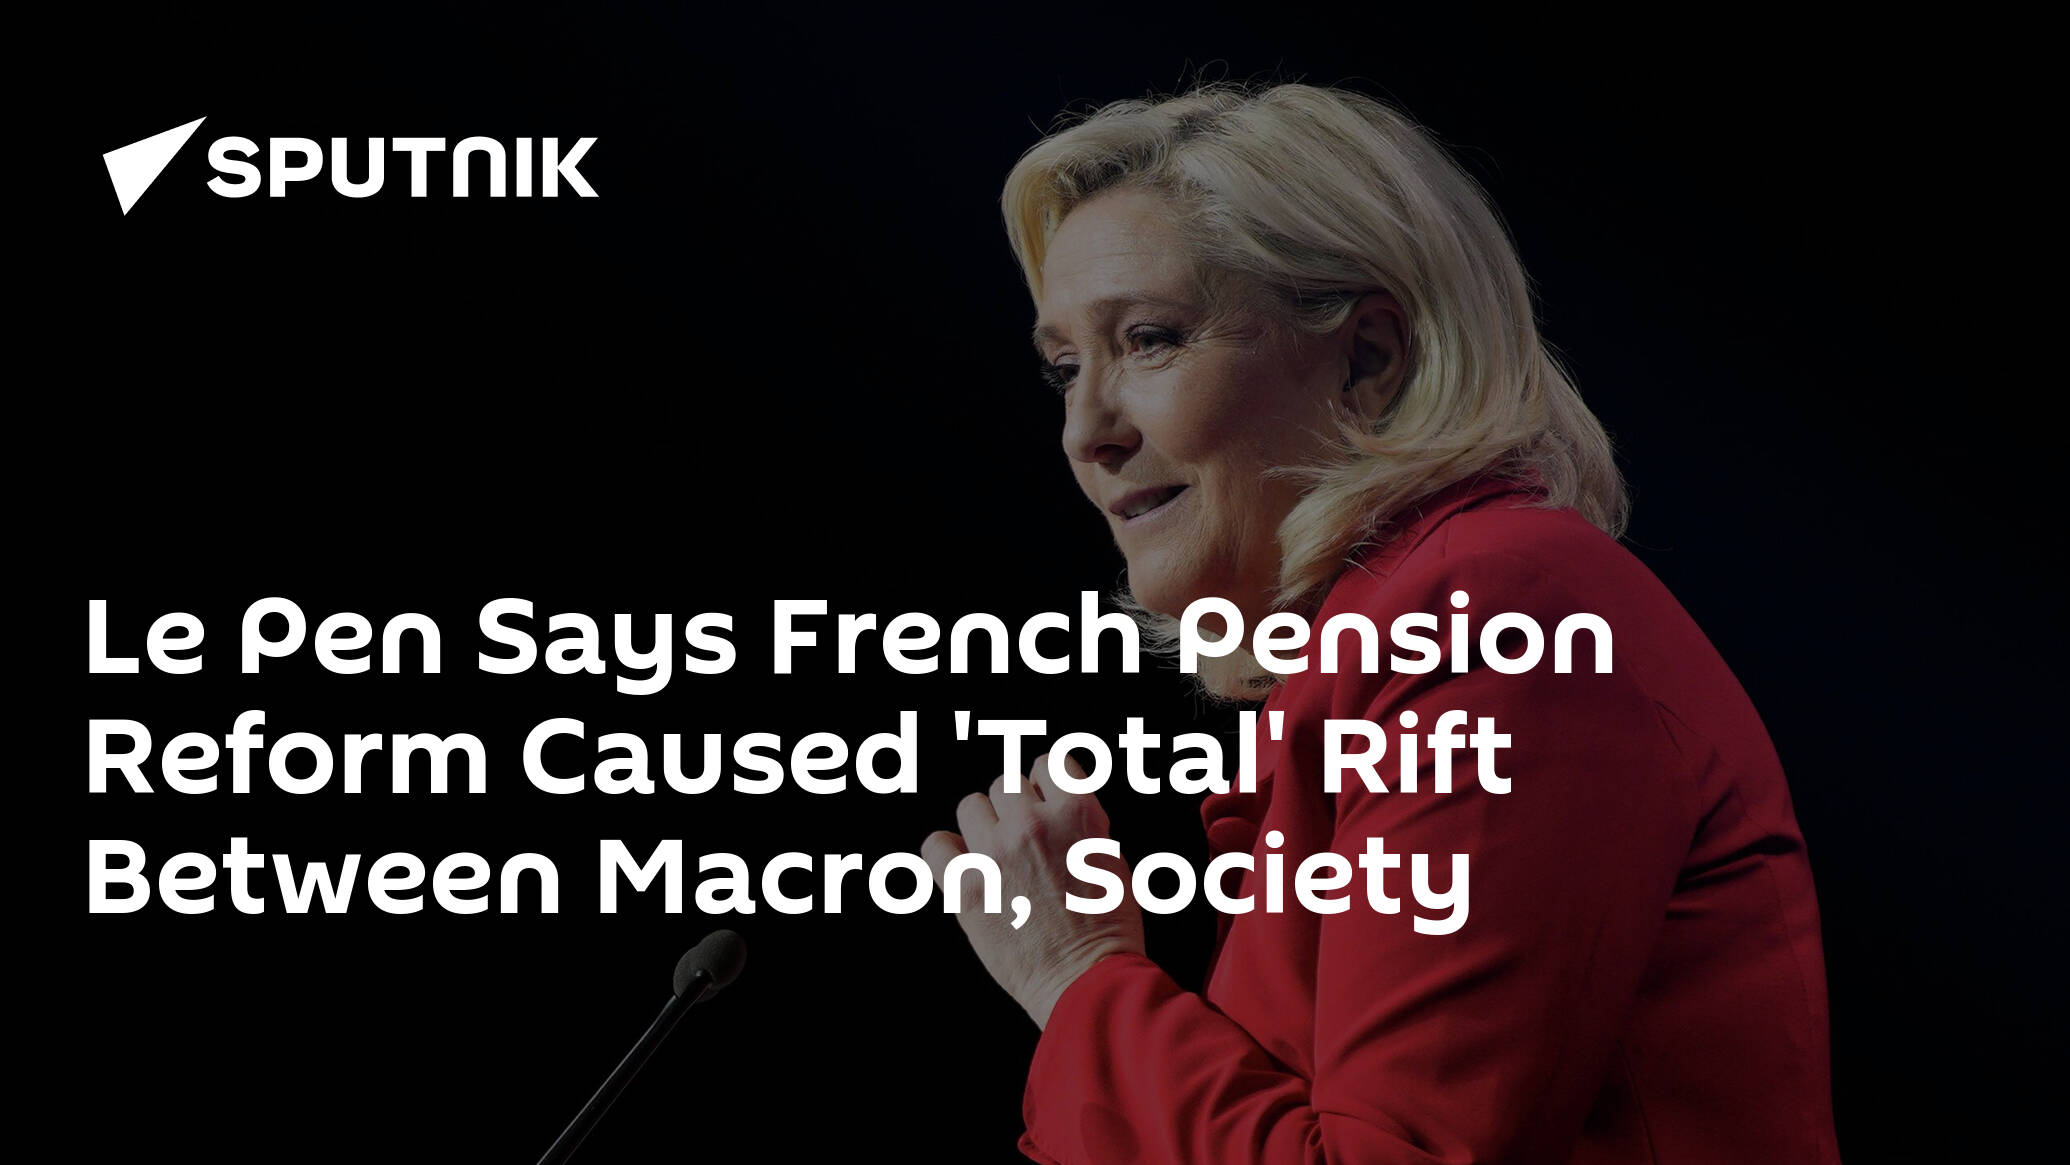 Le Pen Says French Pension Reform Caused 'Total' Rift Between Macron, Society